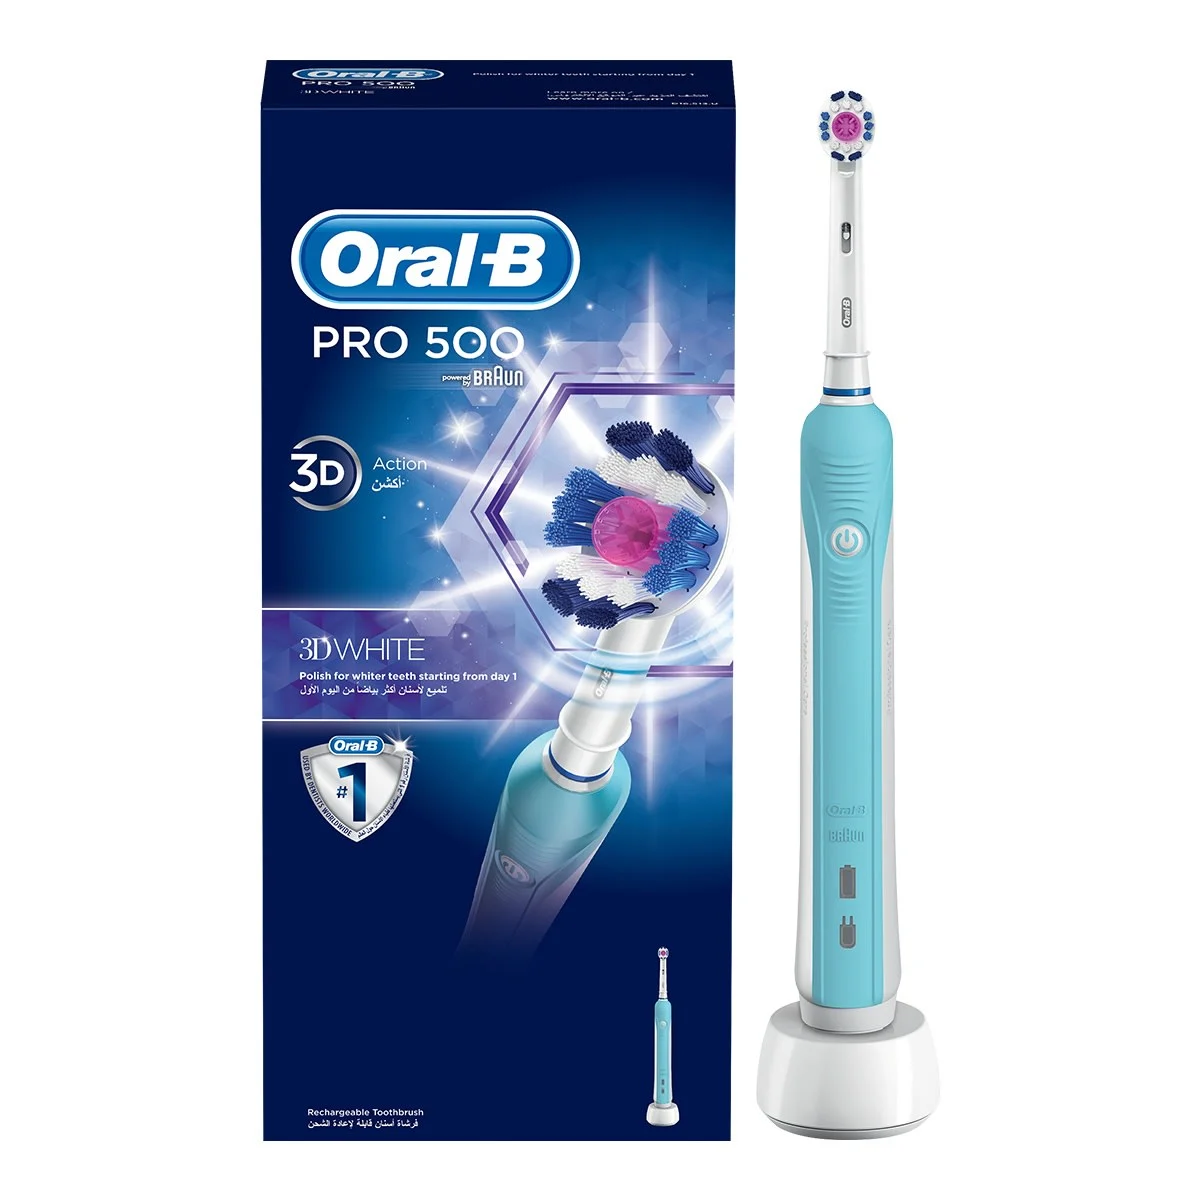 Oral-B Pro 500 3D White electric toothbrush undefined